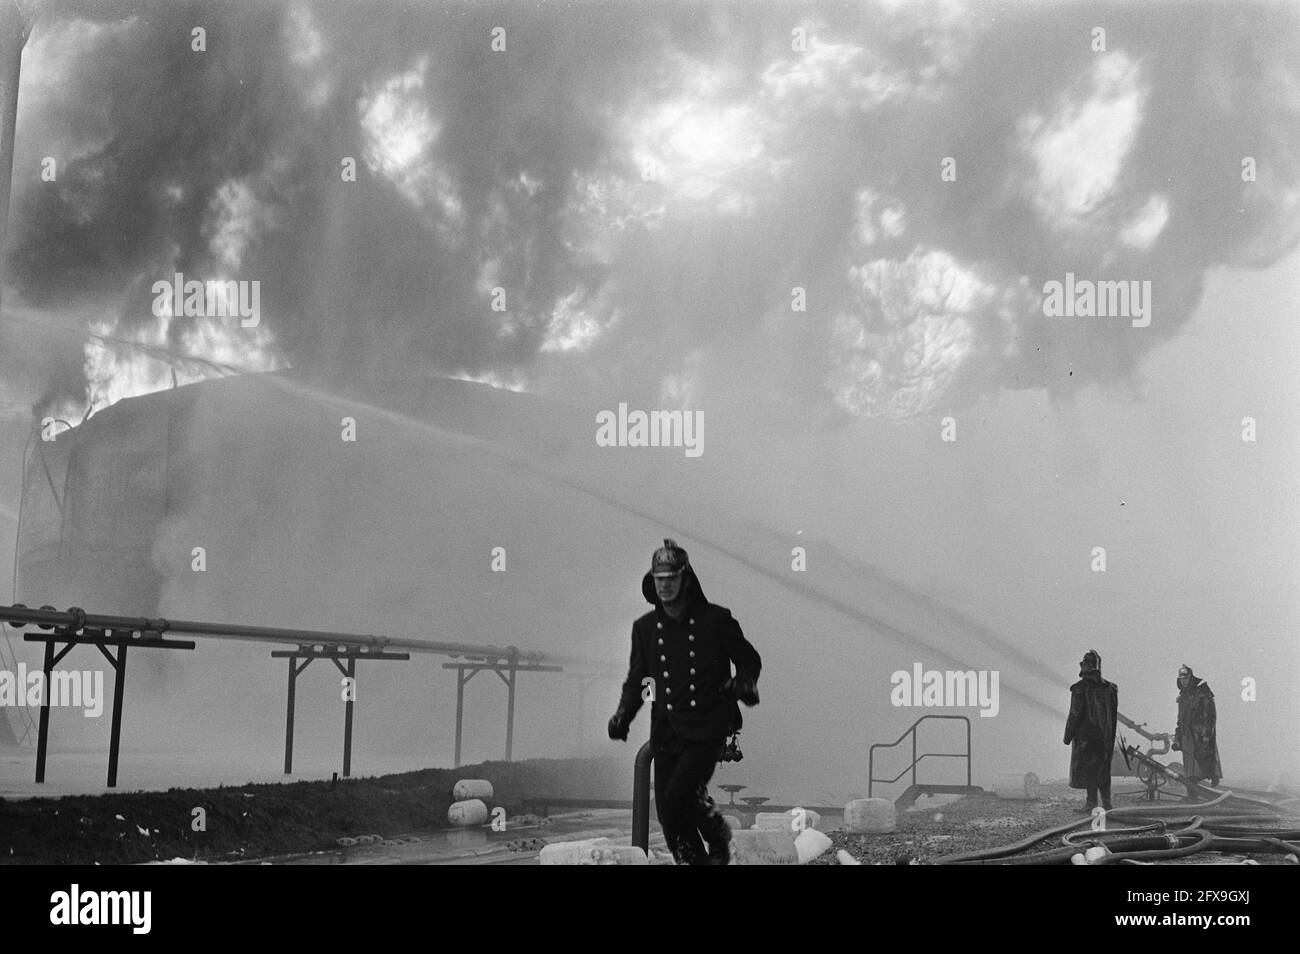 Fire in gasoline storage tank at Comos Amsterdam. An enormous amount of foam was sprayed around the tank, 21 November 1969, fires, The Netherlands, 20th century press agency photo, news to remember, documentary, historic photography 1945-1990, visual stories, human history of the Twentieth Century, capturing moments in time Stock Photo